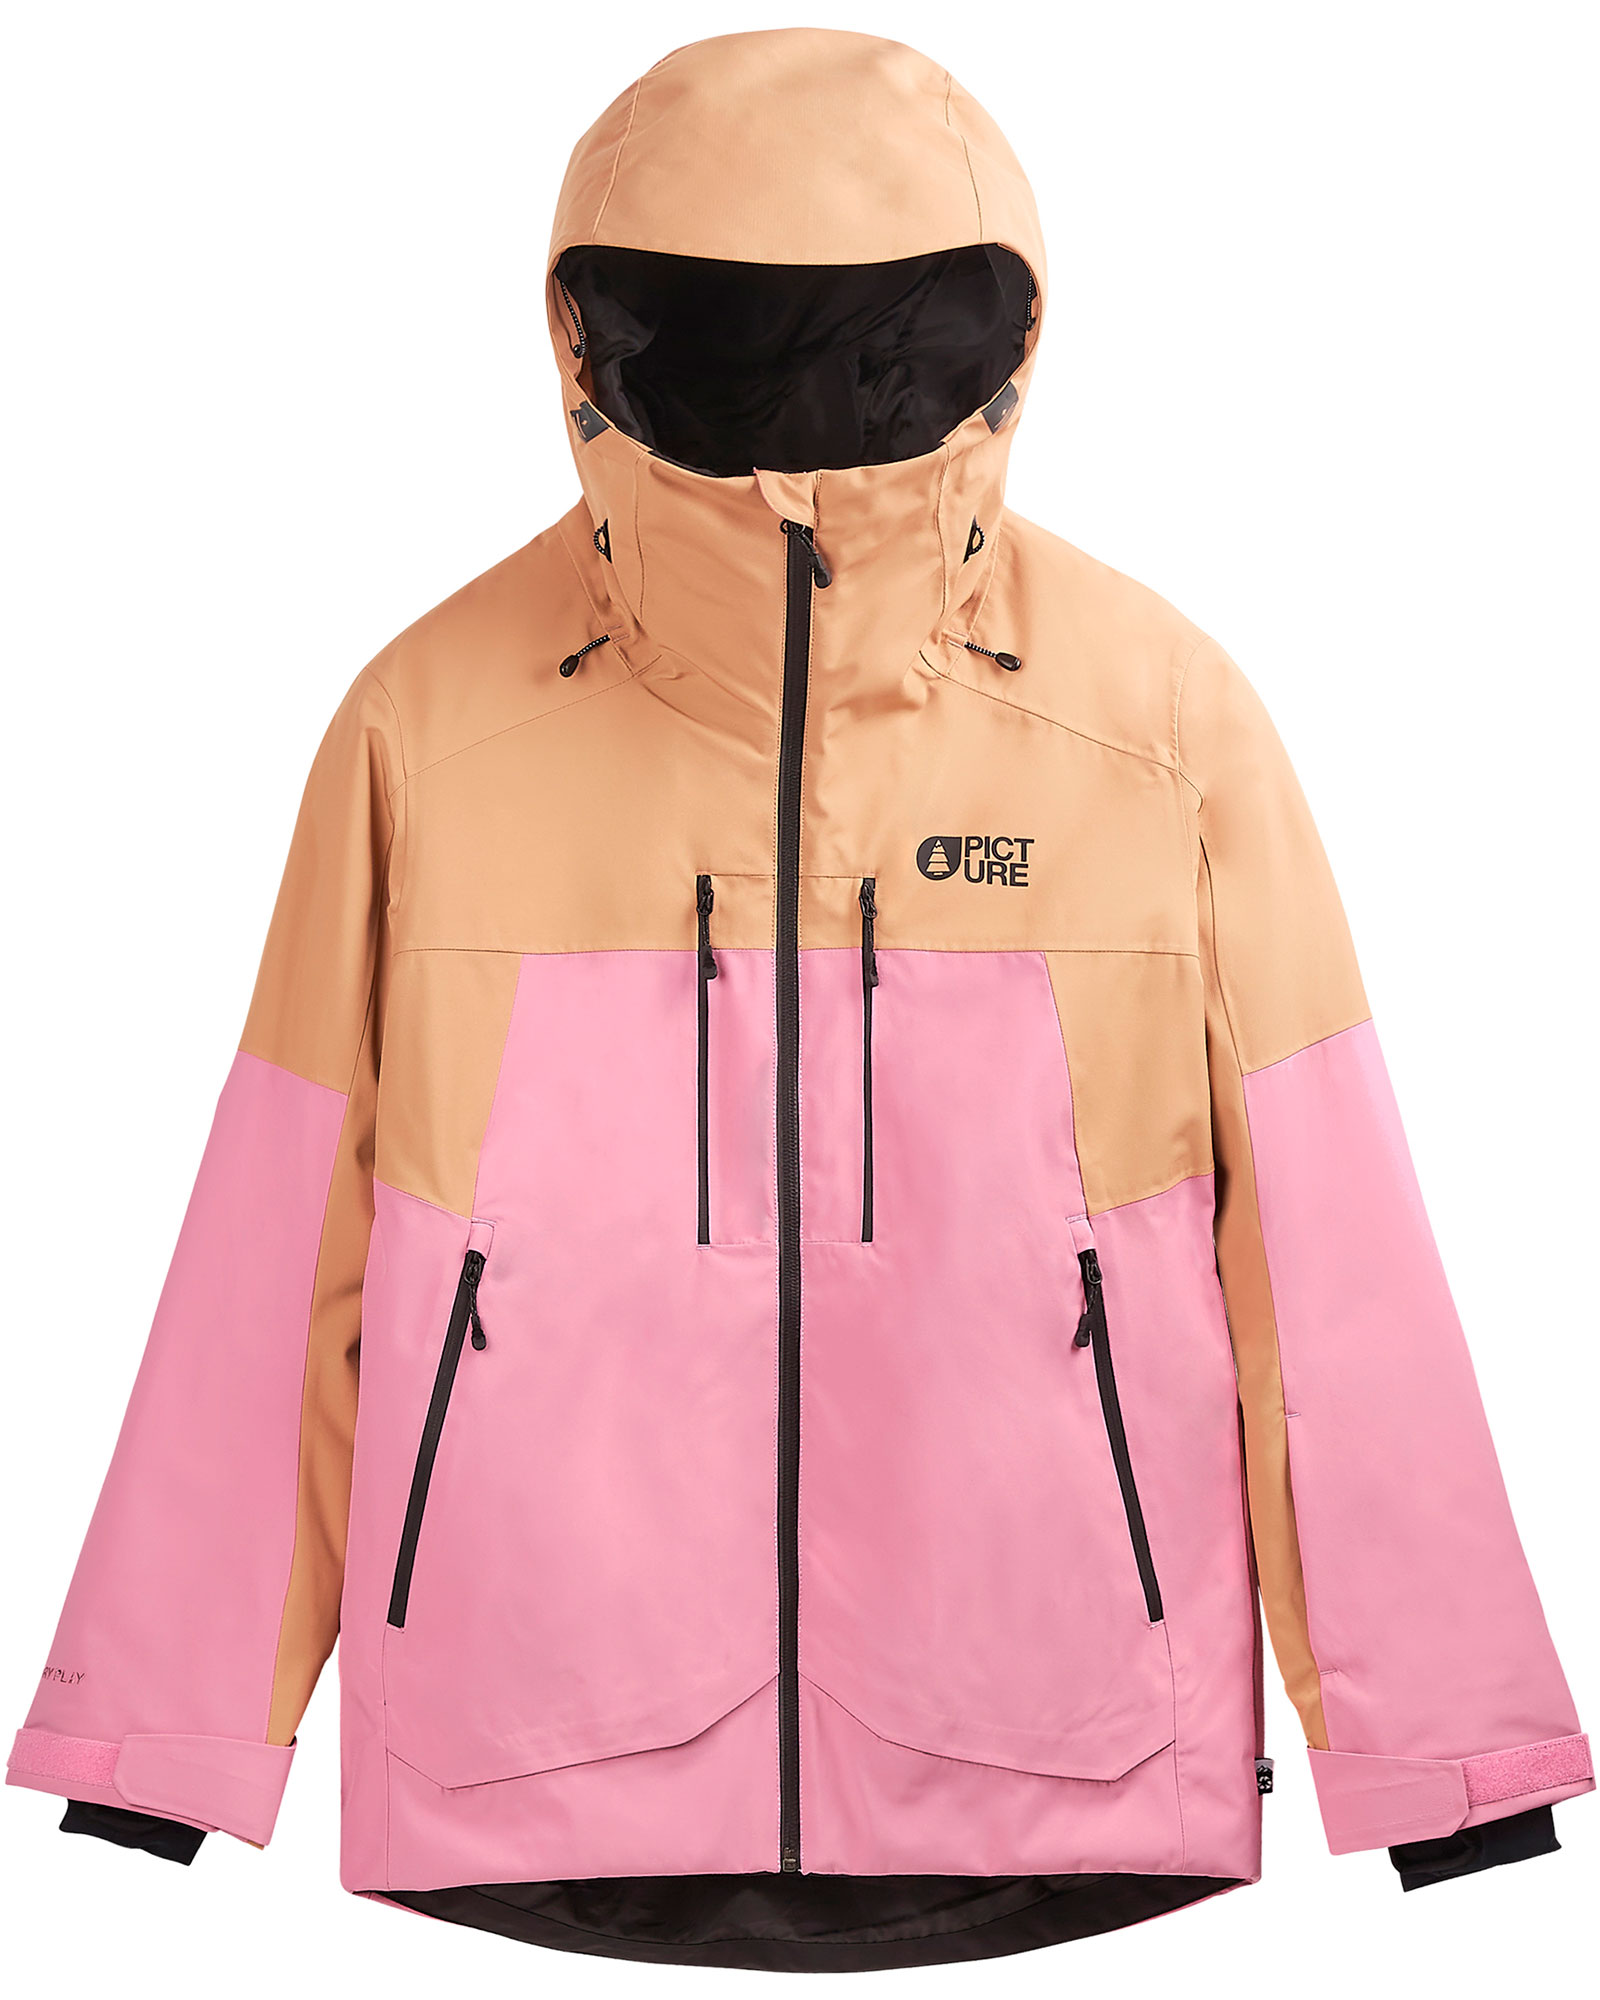 Picture Women’s Exa Jacket - Cashmere Rose/Latte S